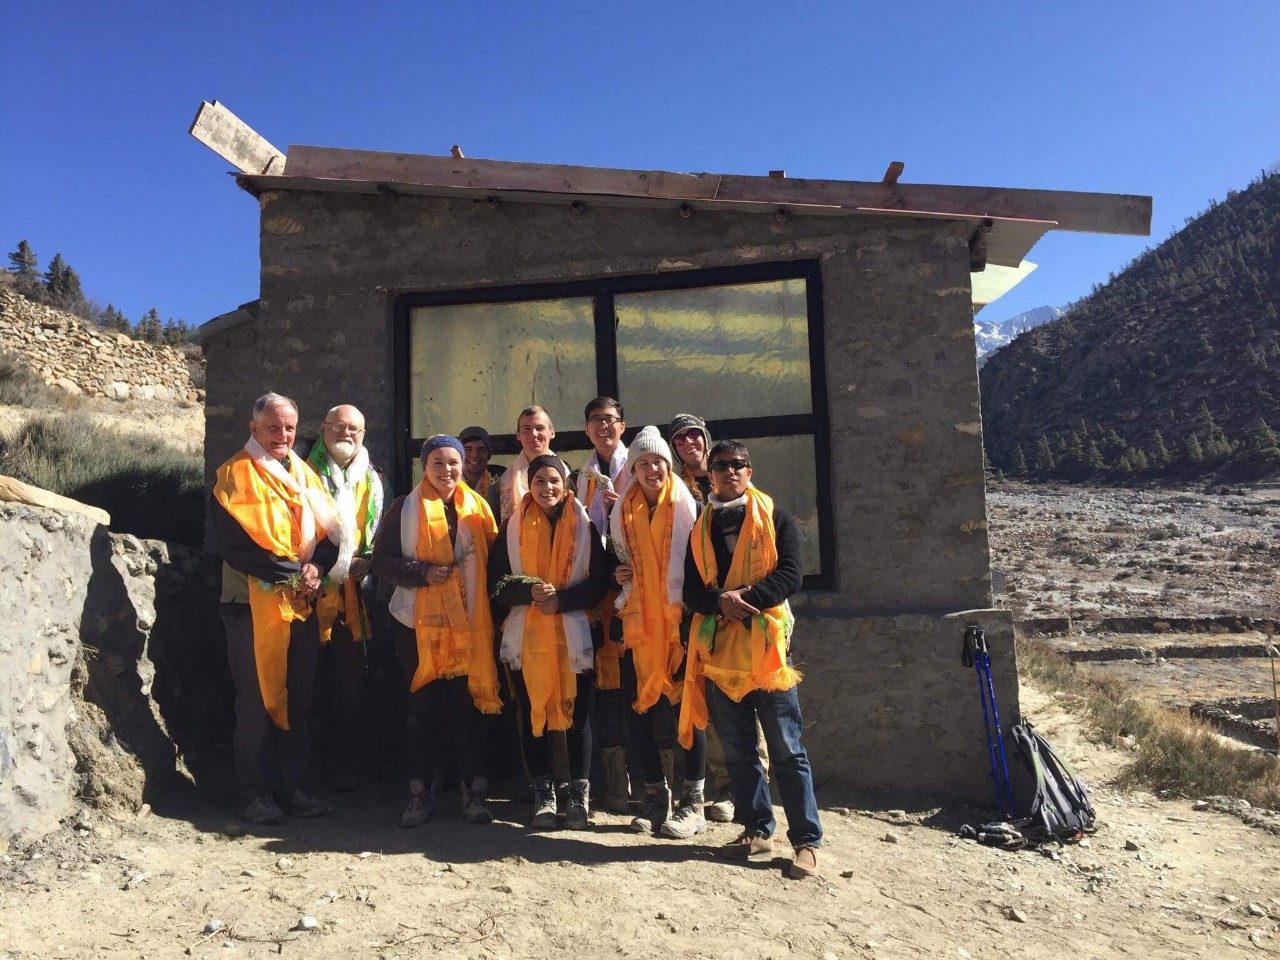 Virginia Tech's Service Without Borders team in front of a warming hut during the Winter 2017-18 trip to Nepal. Back row, from left: Tom Hammet, Professor of Sustainable Biomaterials; Brian Benham, Professor Biological Systems Engineering; Alfonso Marino; Mark Shepheard; Julian Park; Evan Charnoff. Front Row, from left: Sylvia Connor;  Sara Herndandez; Lauren Holt; and Tsewang Gyurme, in country contact/local guide. Photo submitted by Mark Shepheard.